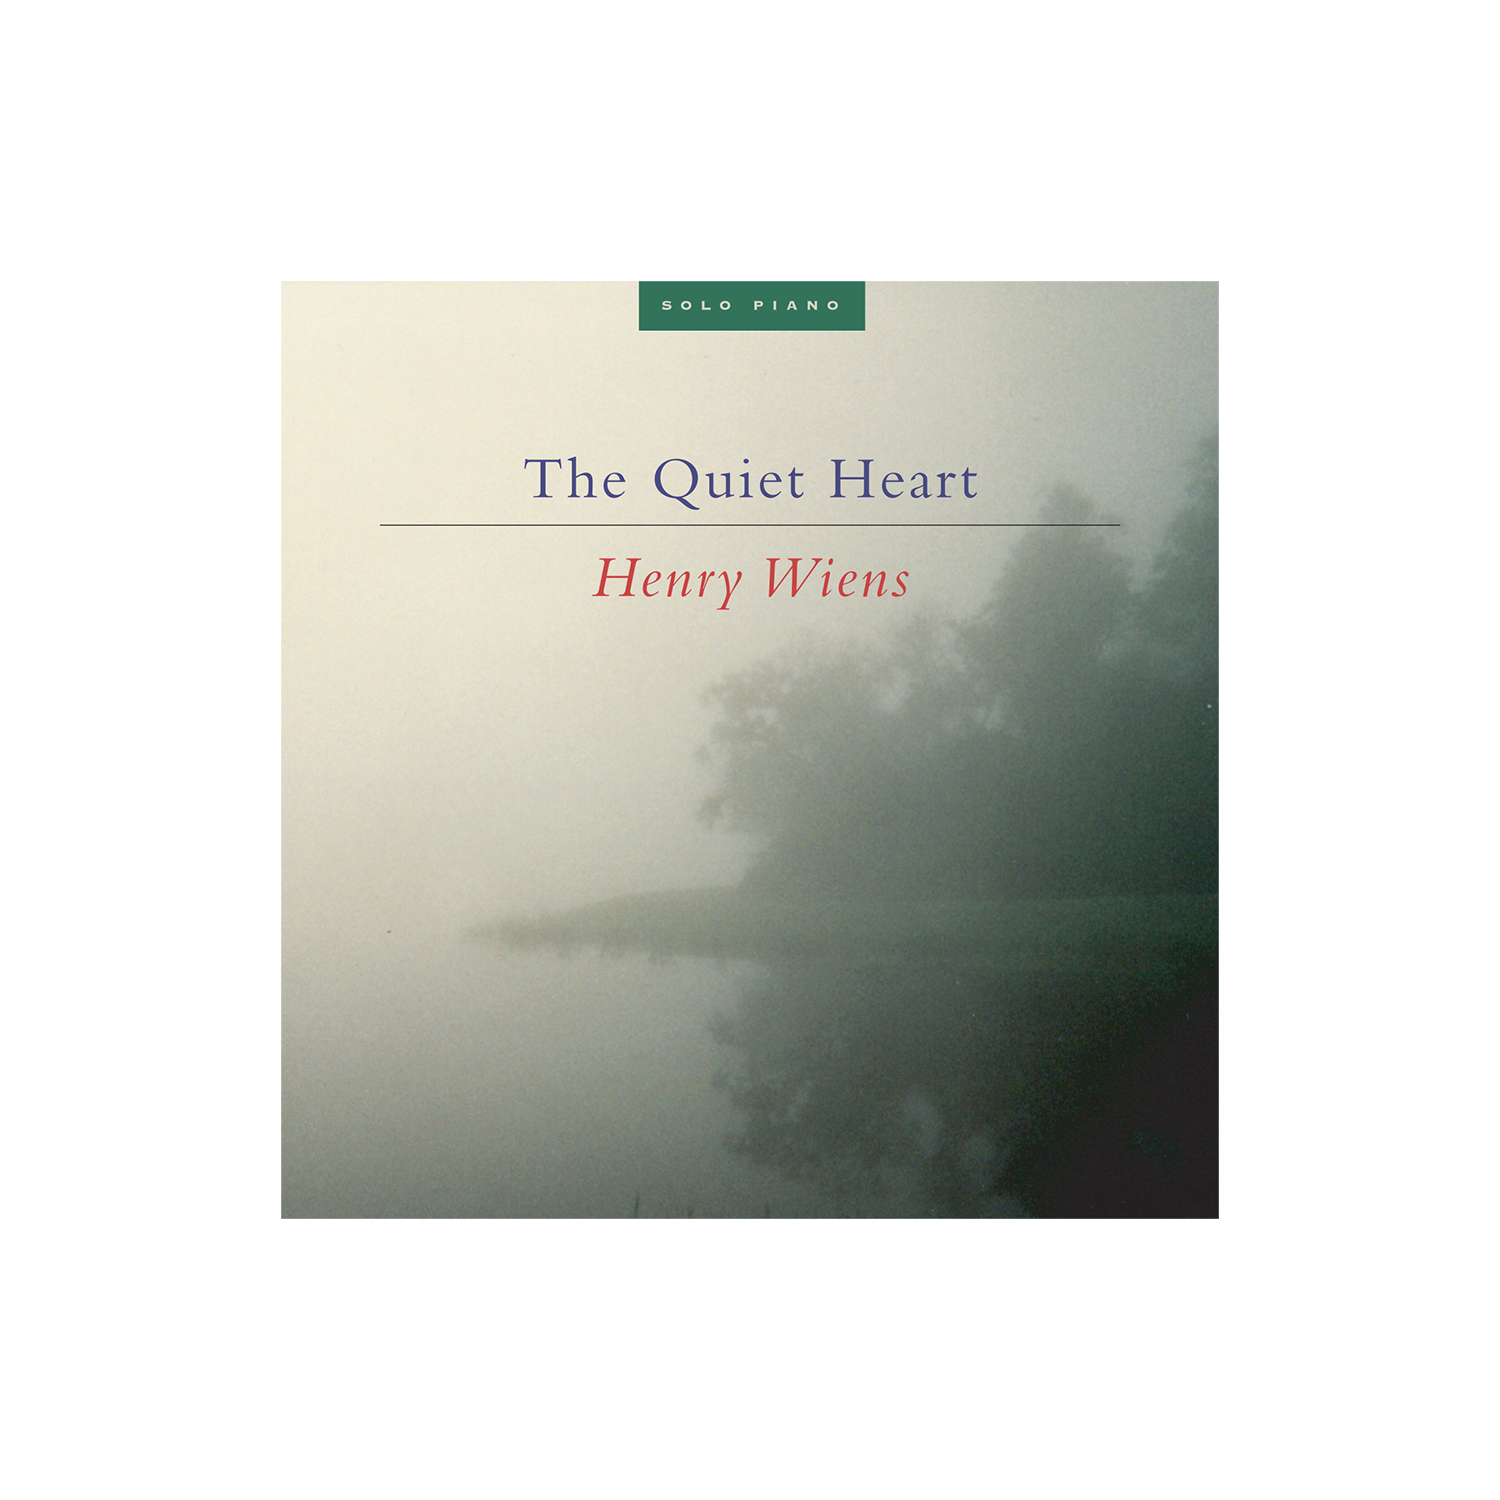   The Quiet Place  cd cover featuring contemplative solo piano music by Henry Wiens; photograph by Jeenee Lee 